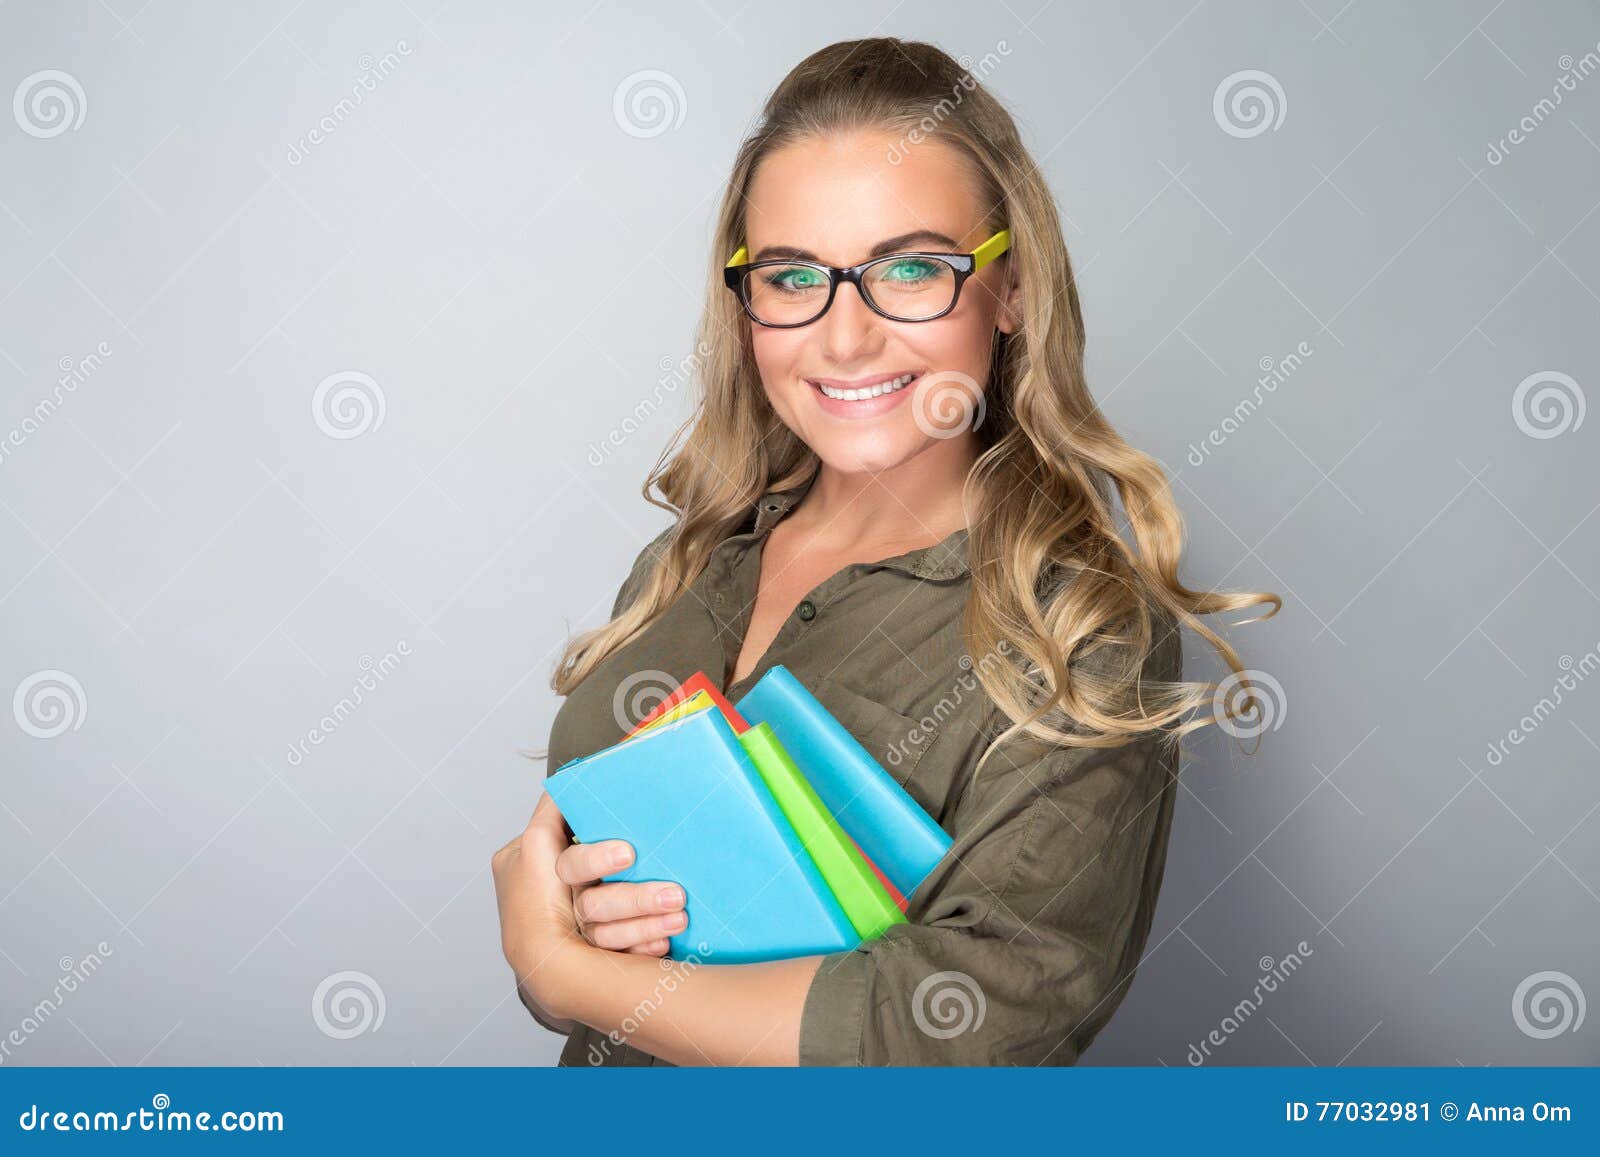 Cute student girl portrait stock image. Image of education - 77032981